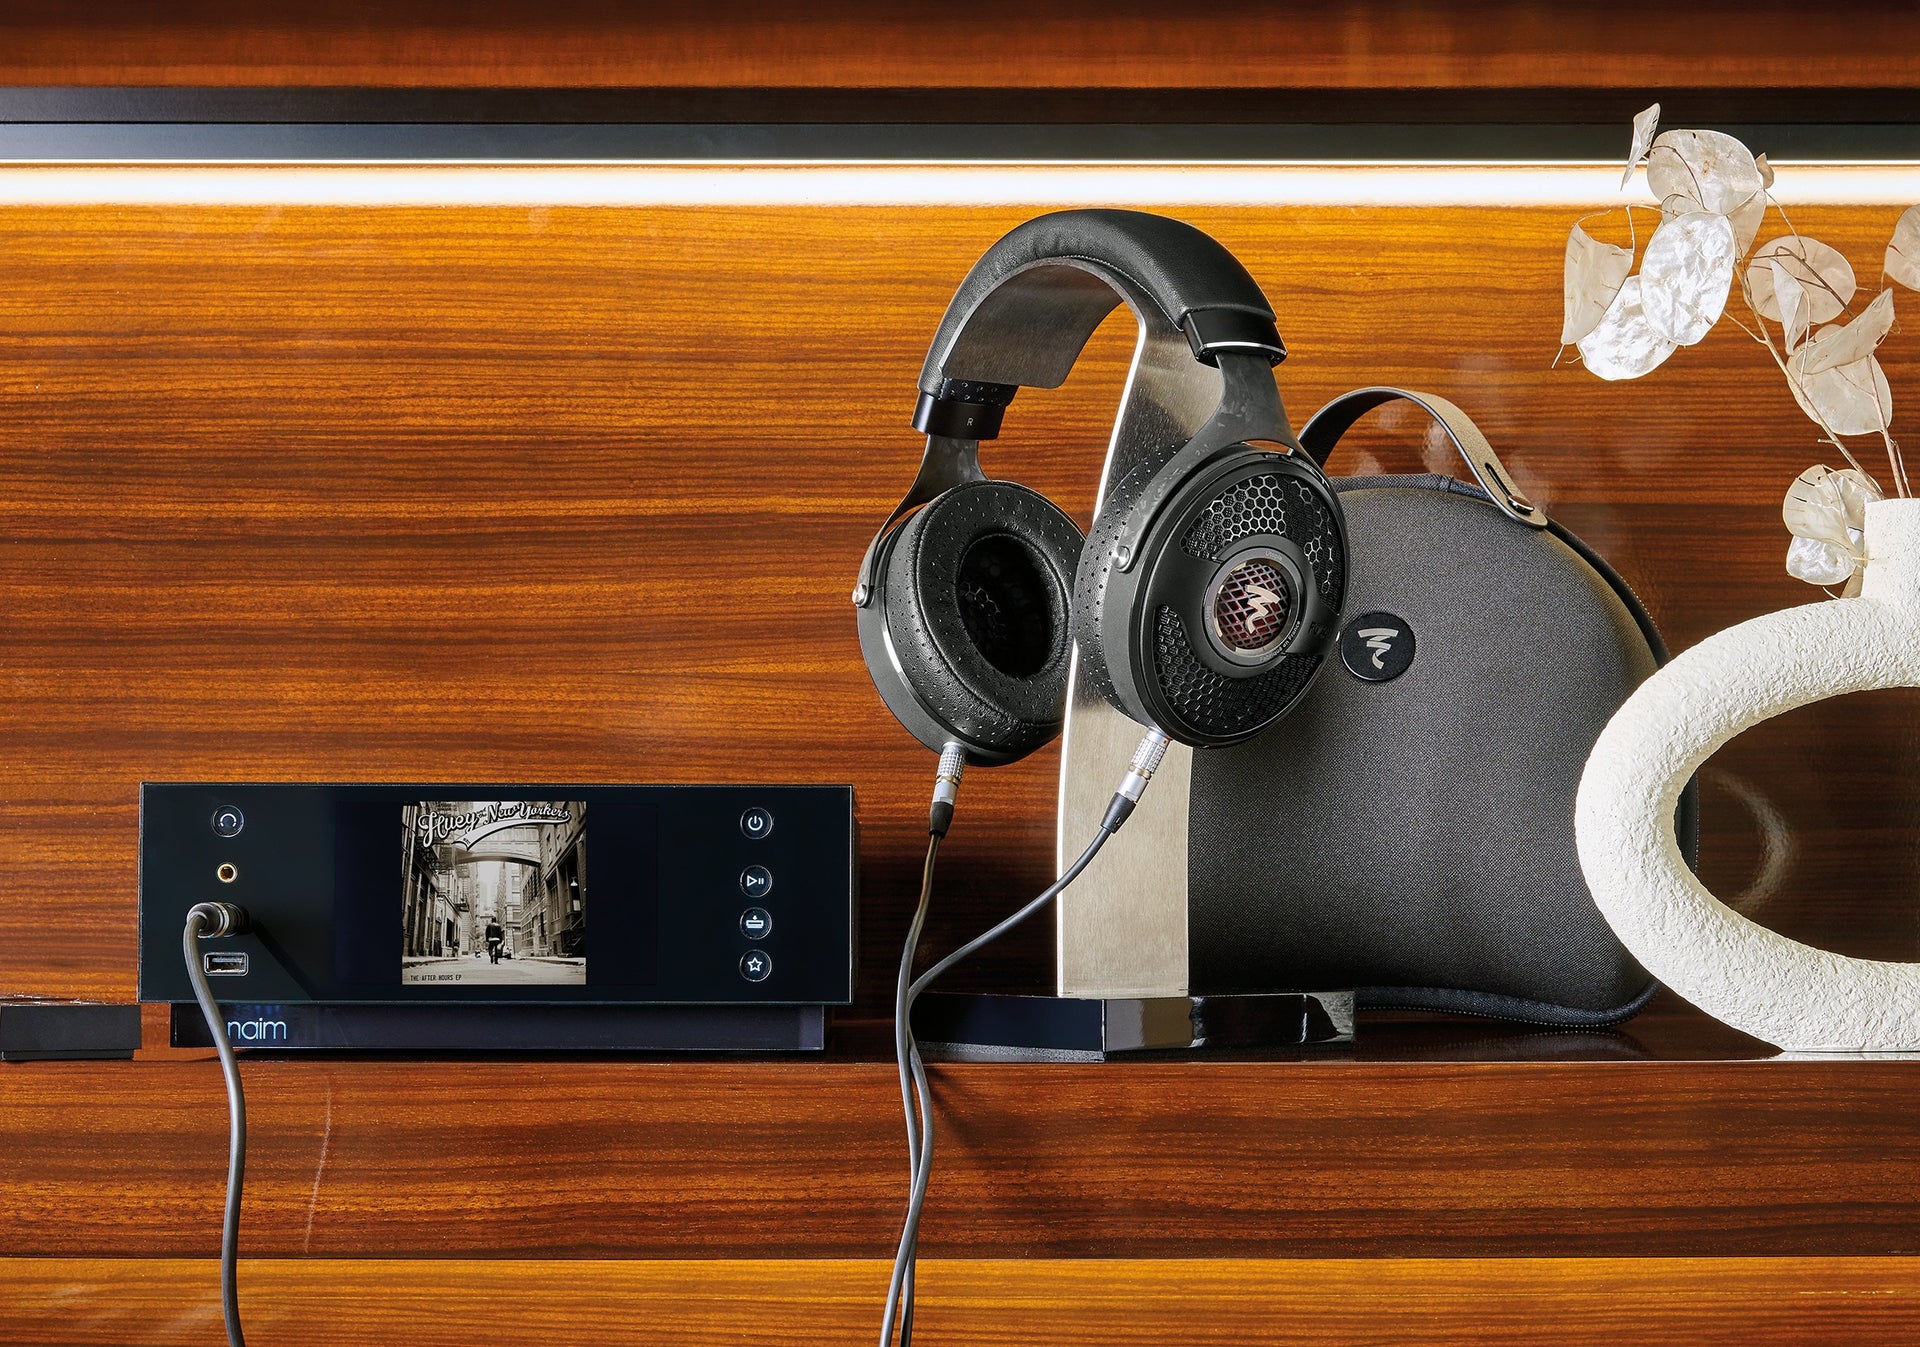 Utopia headphones on stand connected to Naim amplifier on wood backdrop